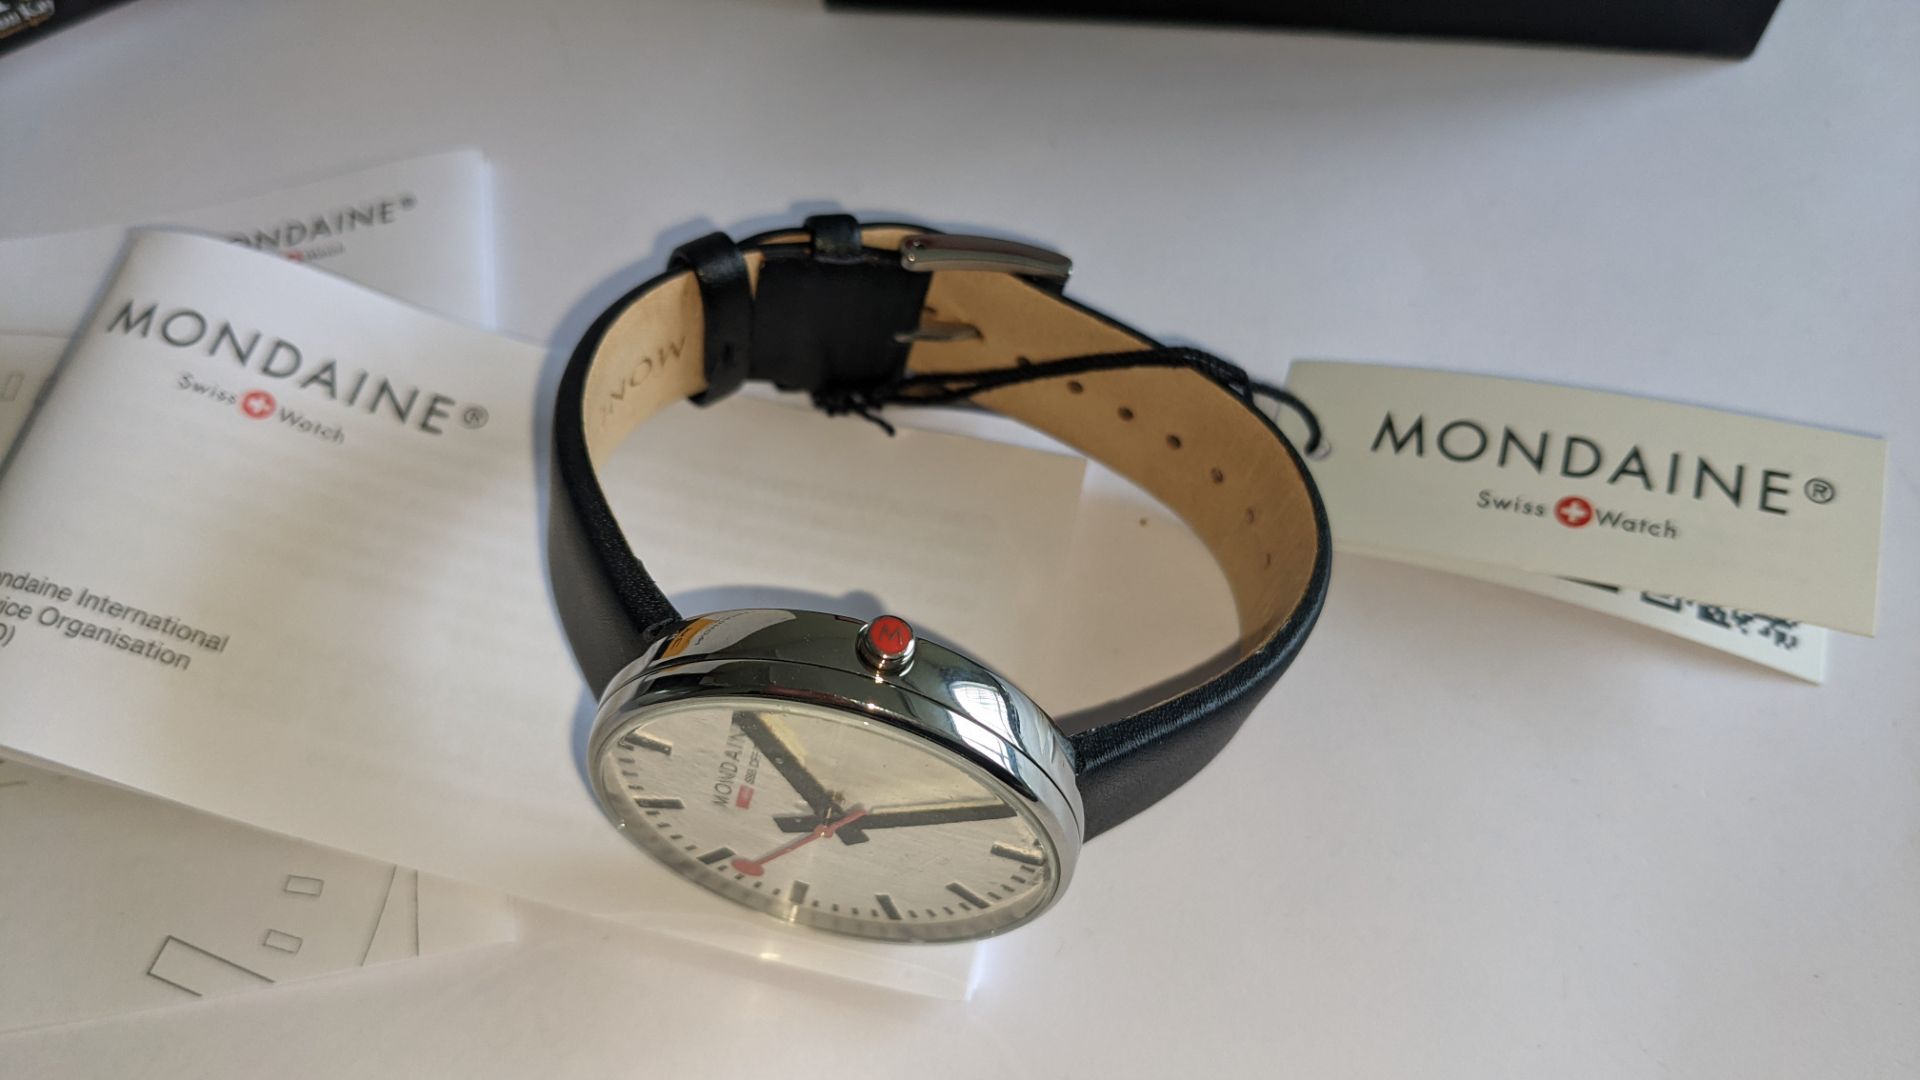 Mondaine watch, product code MSX.4211B.LB. RRP £219. Water resistant, stainless steel case. This l - Image 6 of 18